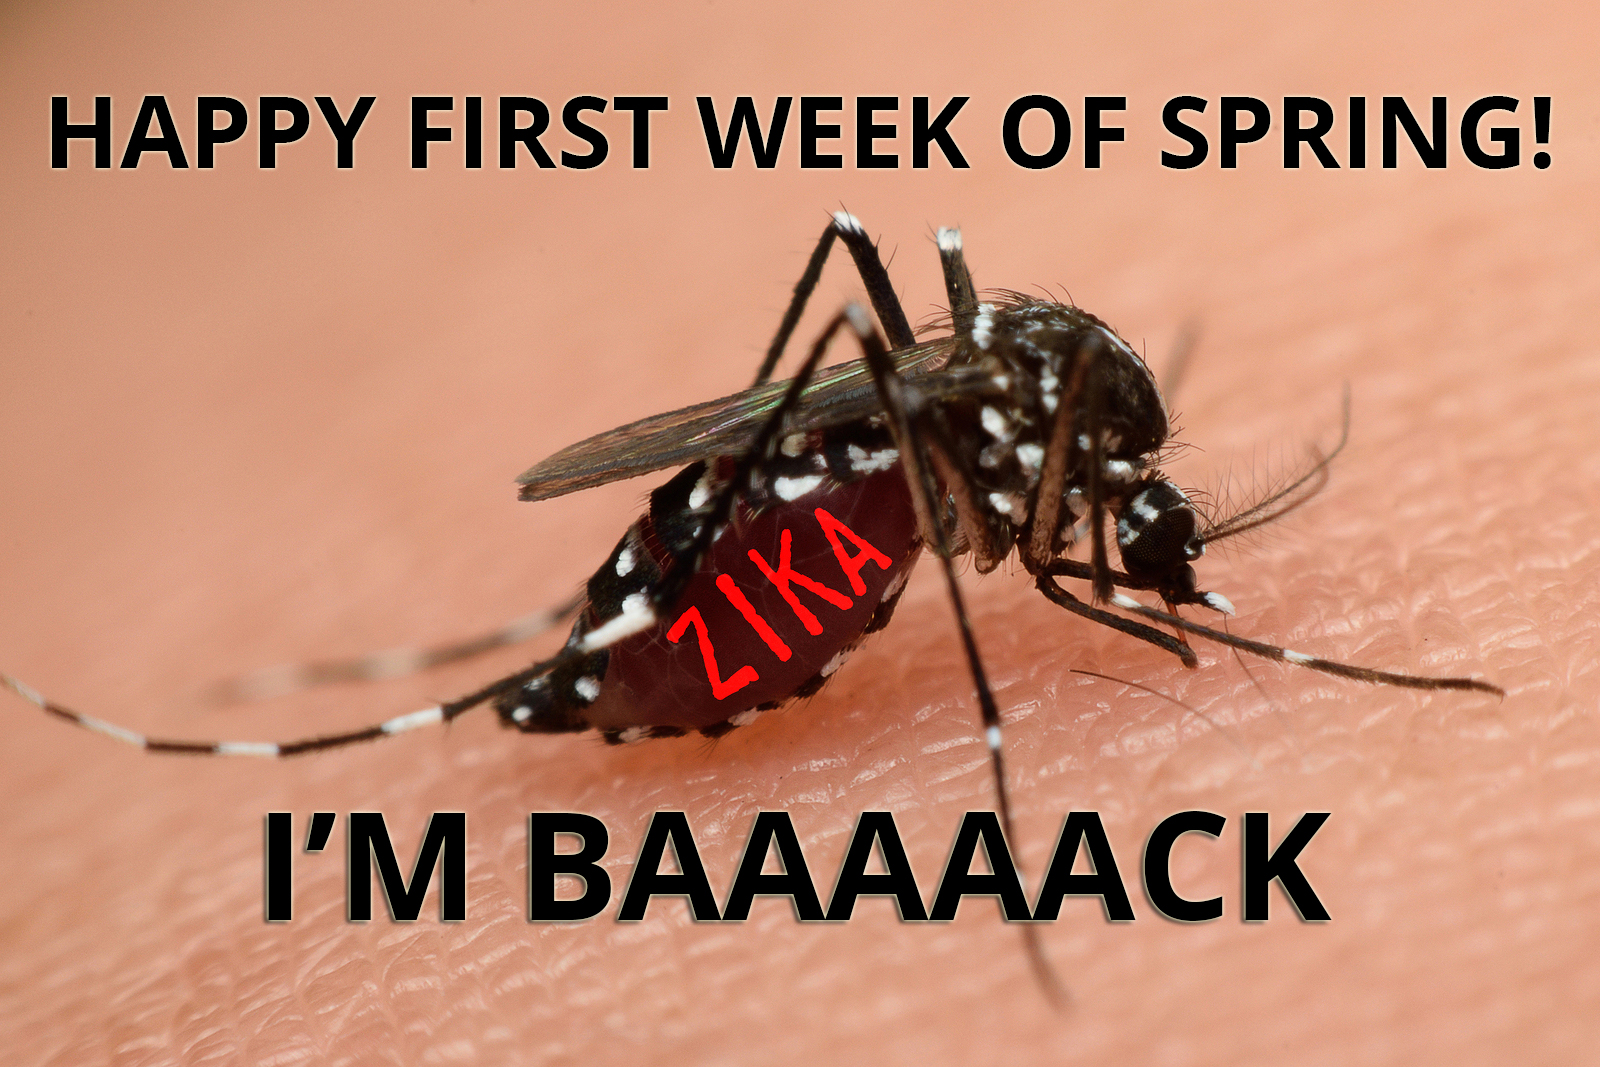 Spring is Here & So Are Mosquitoes! Here's How You Can Prevent Mosquito Bites & Diseases Like Zika